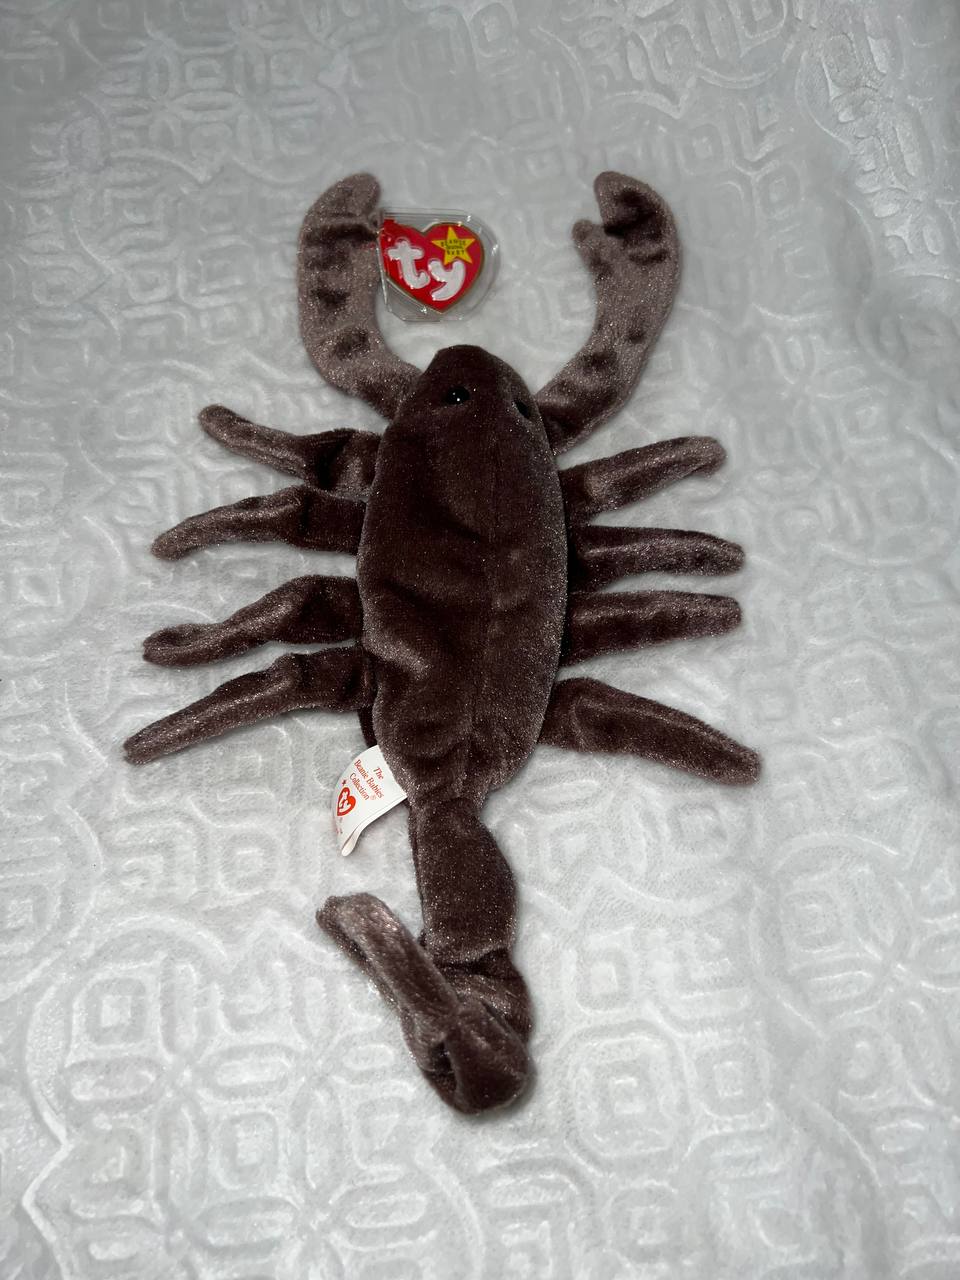 *RARE* MINT Stinger Beanie Baby 1997 With Tag